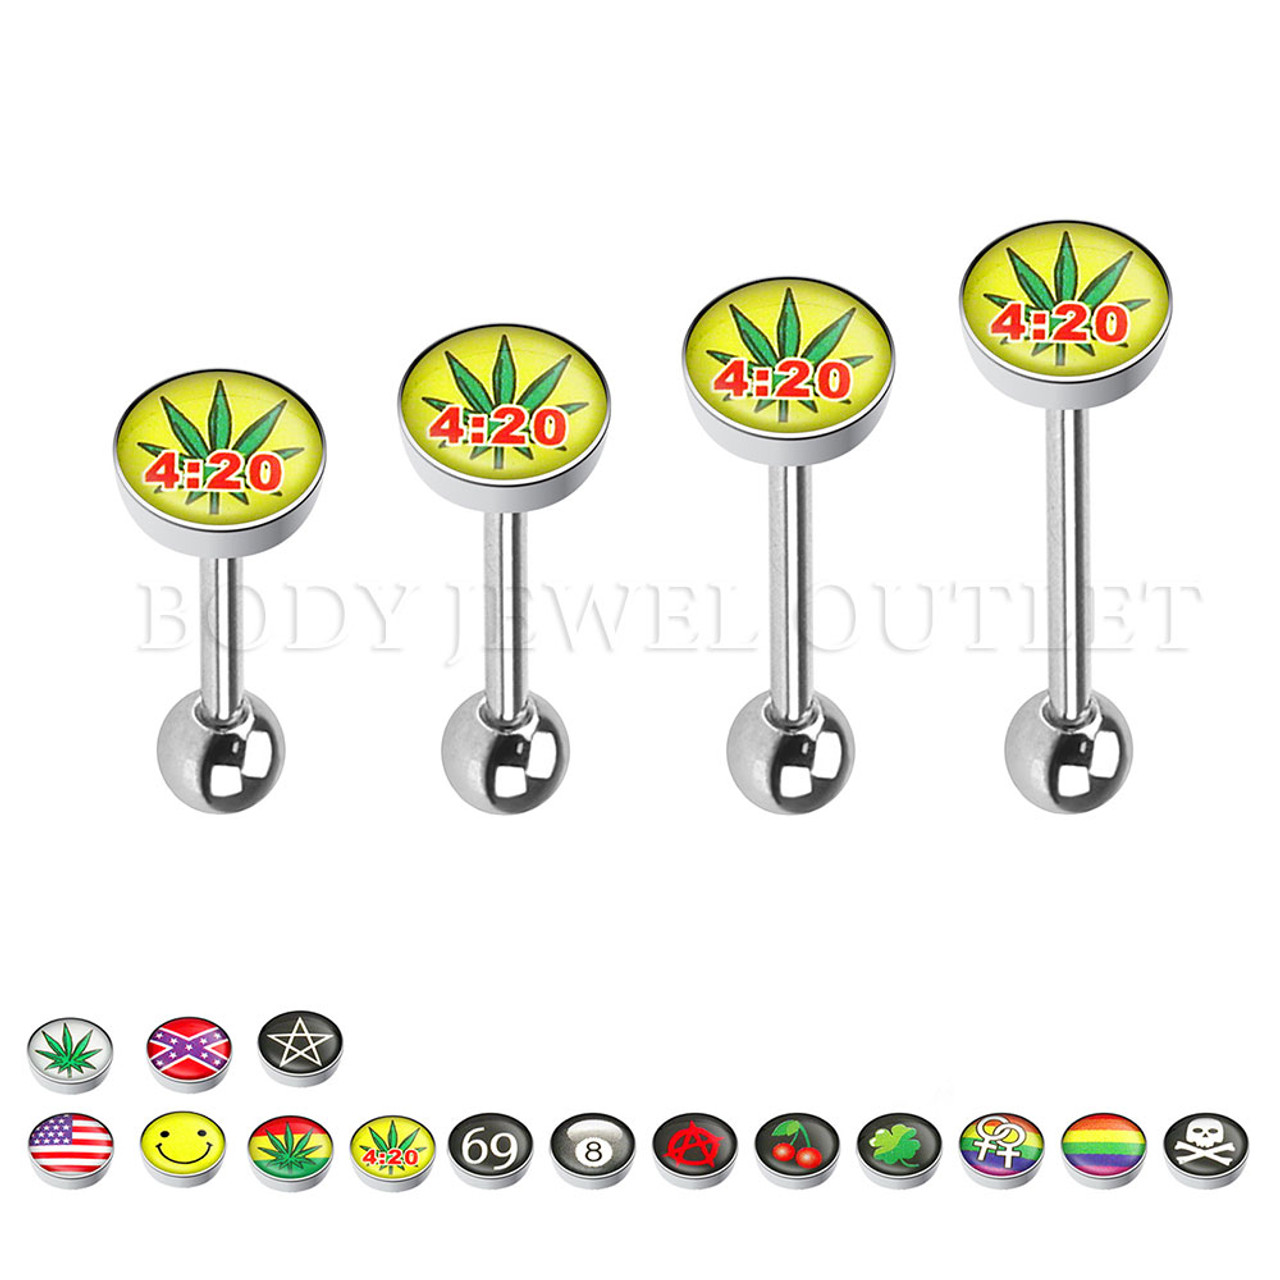 Pot Leaf with 4:20 - Steel Ball 5mm - 316L Surgical Steel Straight Barbell/Tongue Piercing - 14 Gauge (1 Piece)